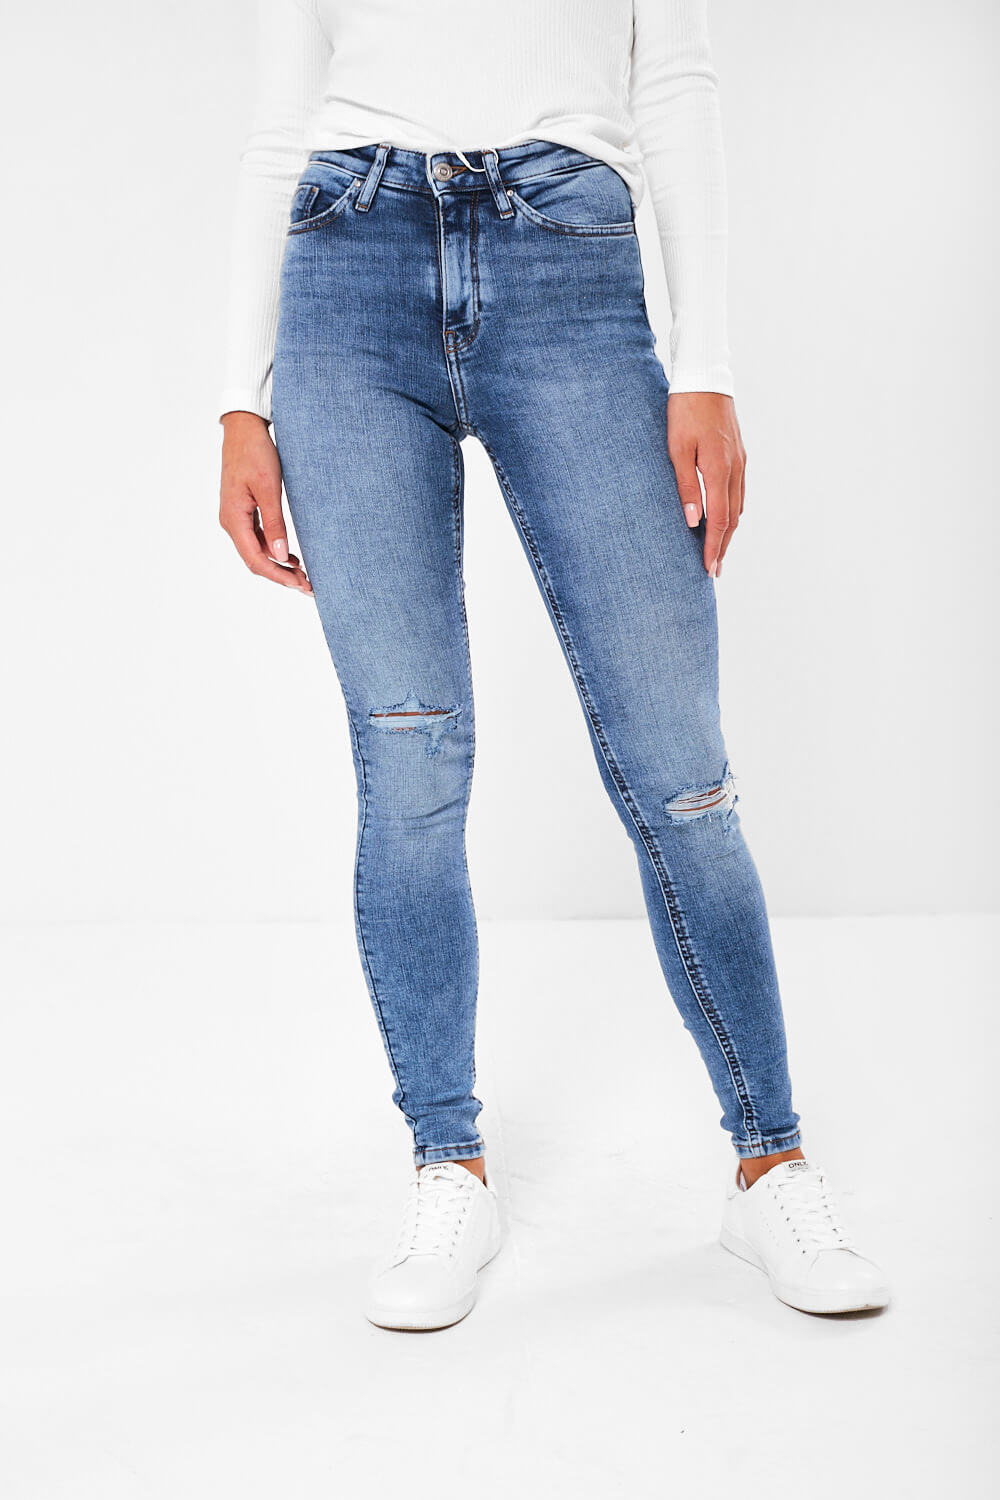 Only Paola High Waist Skinny Jeans in Light Wash | iCLOTHING - iCLOTHING